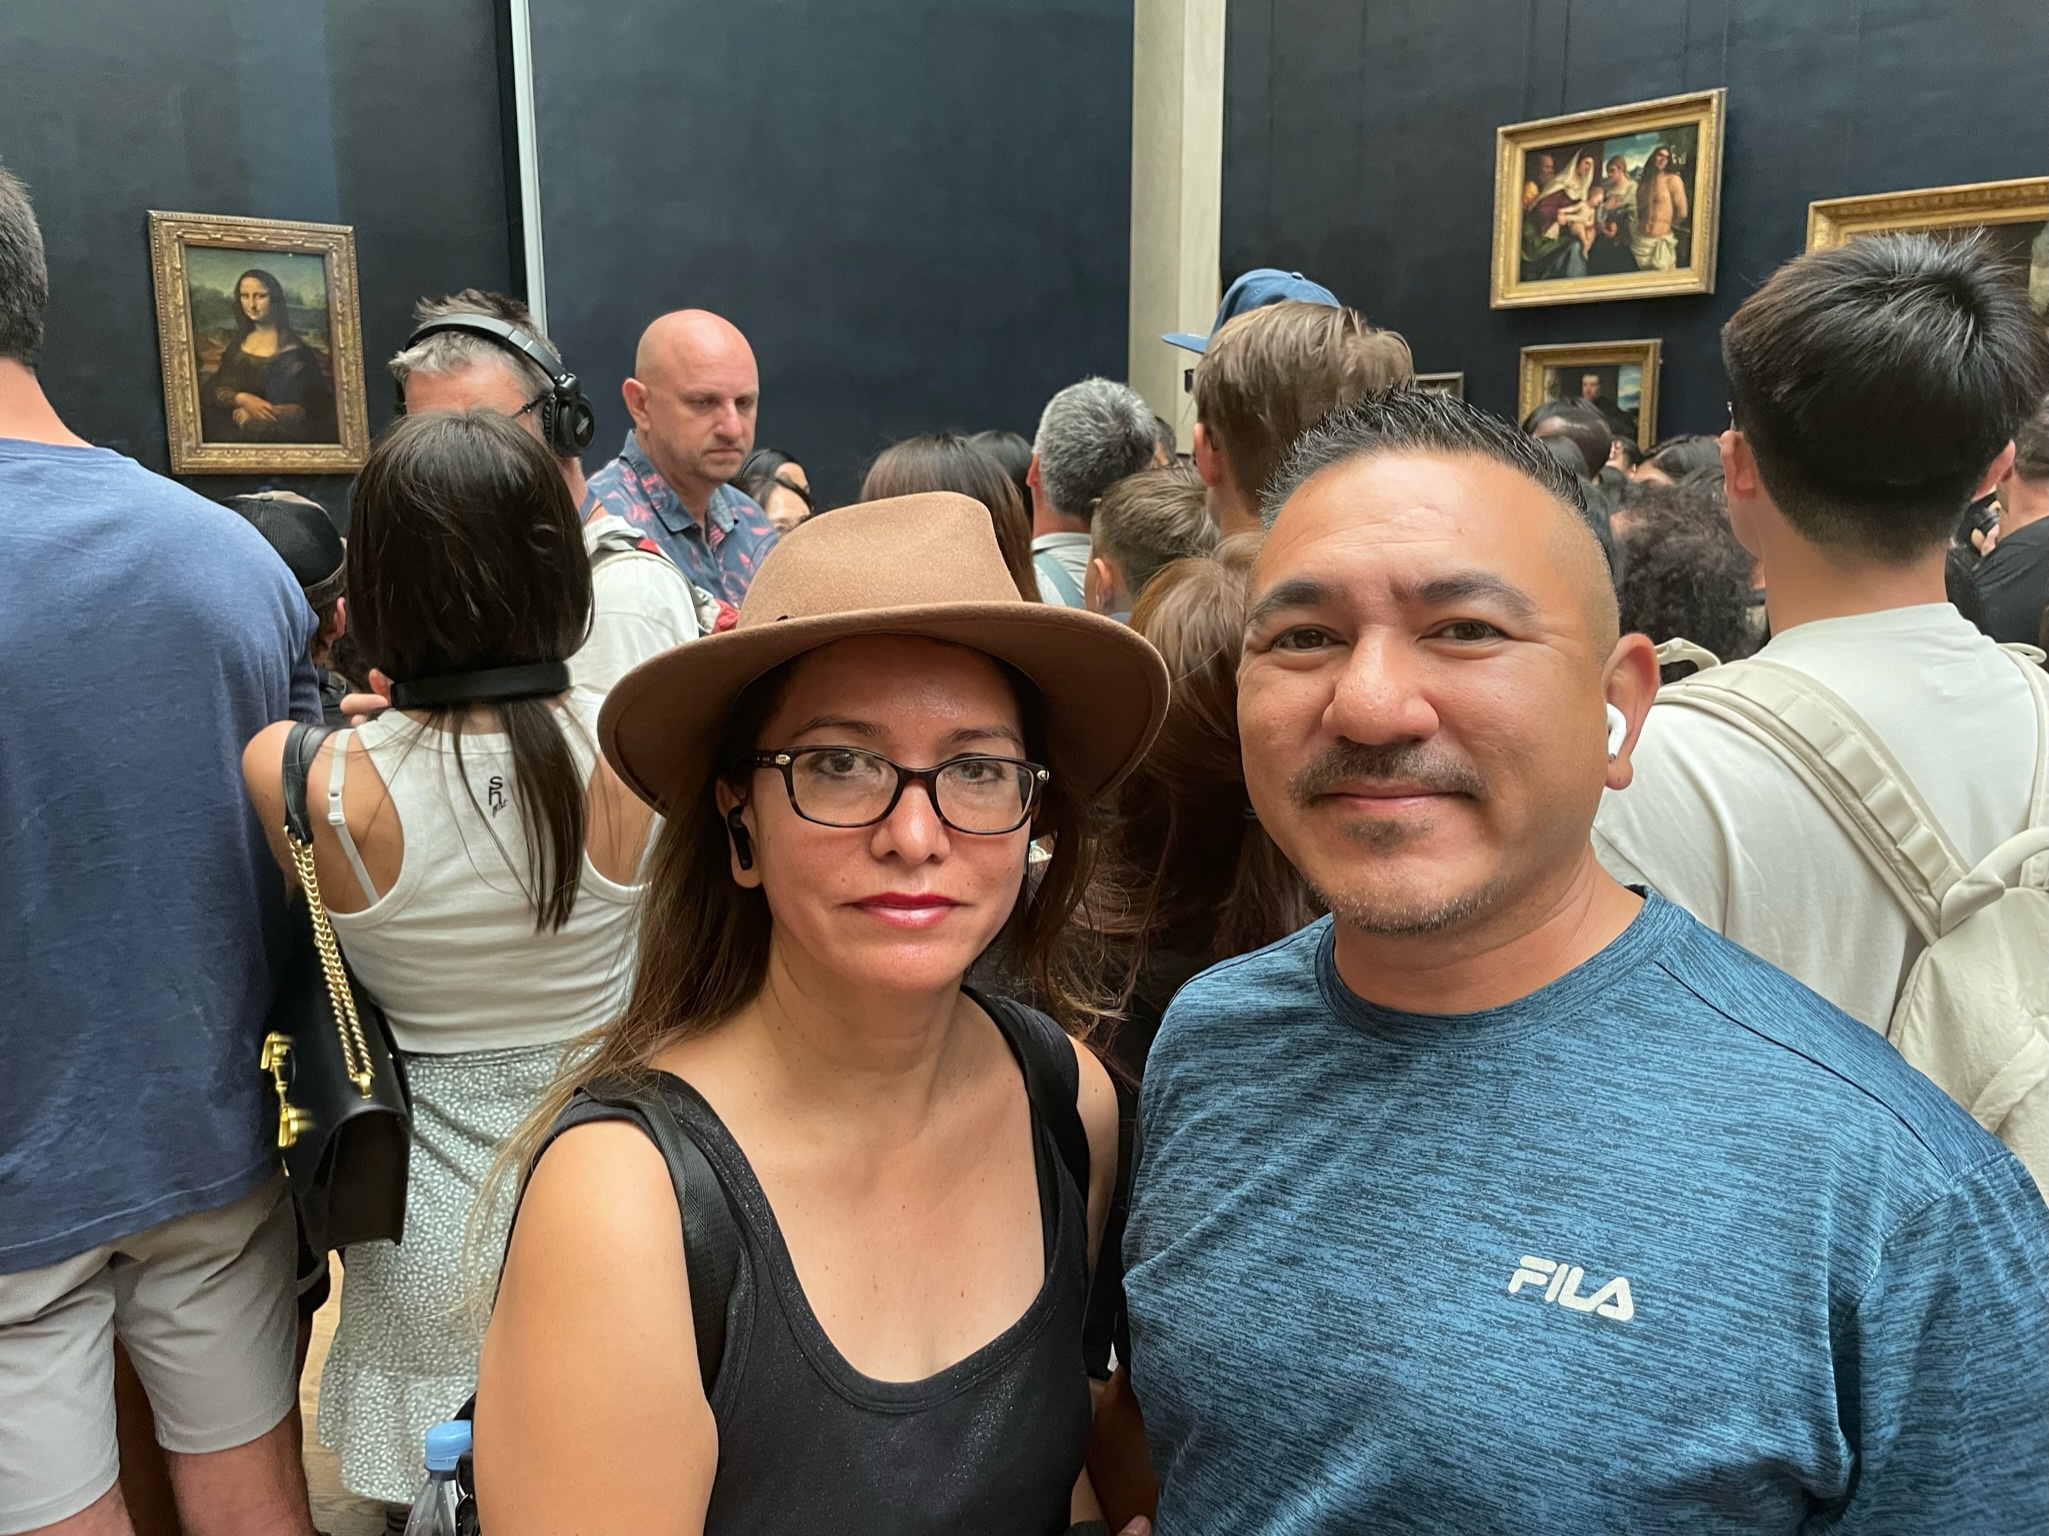 Photo with the Mona Lisa louvre